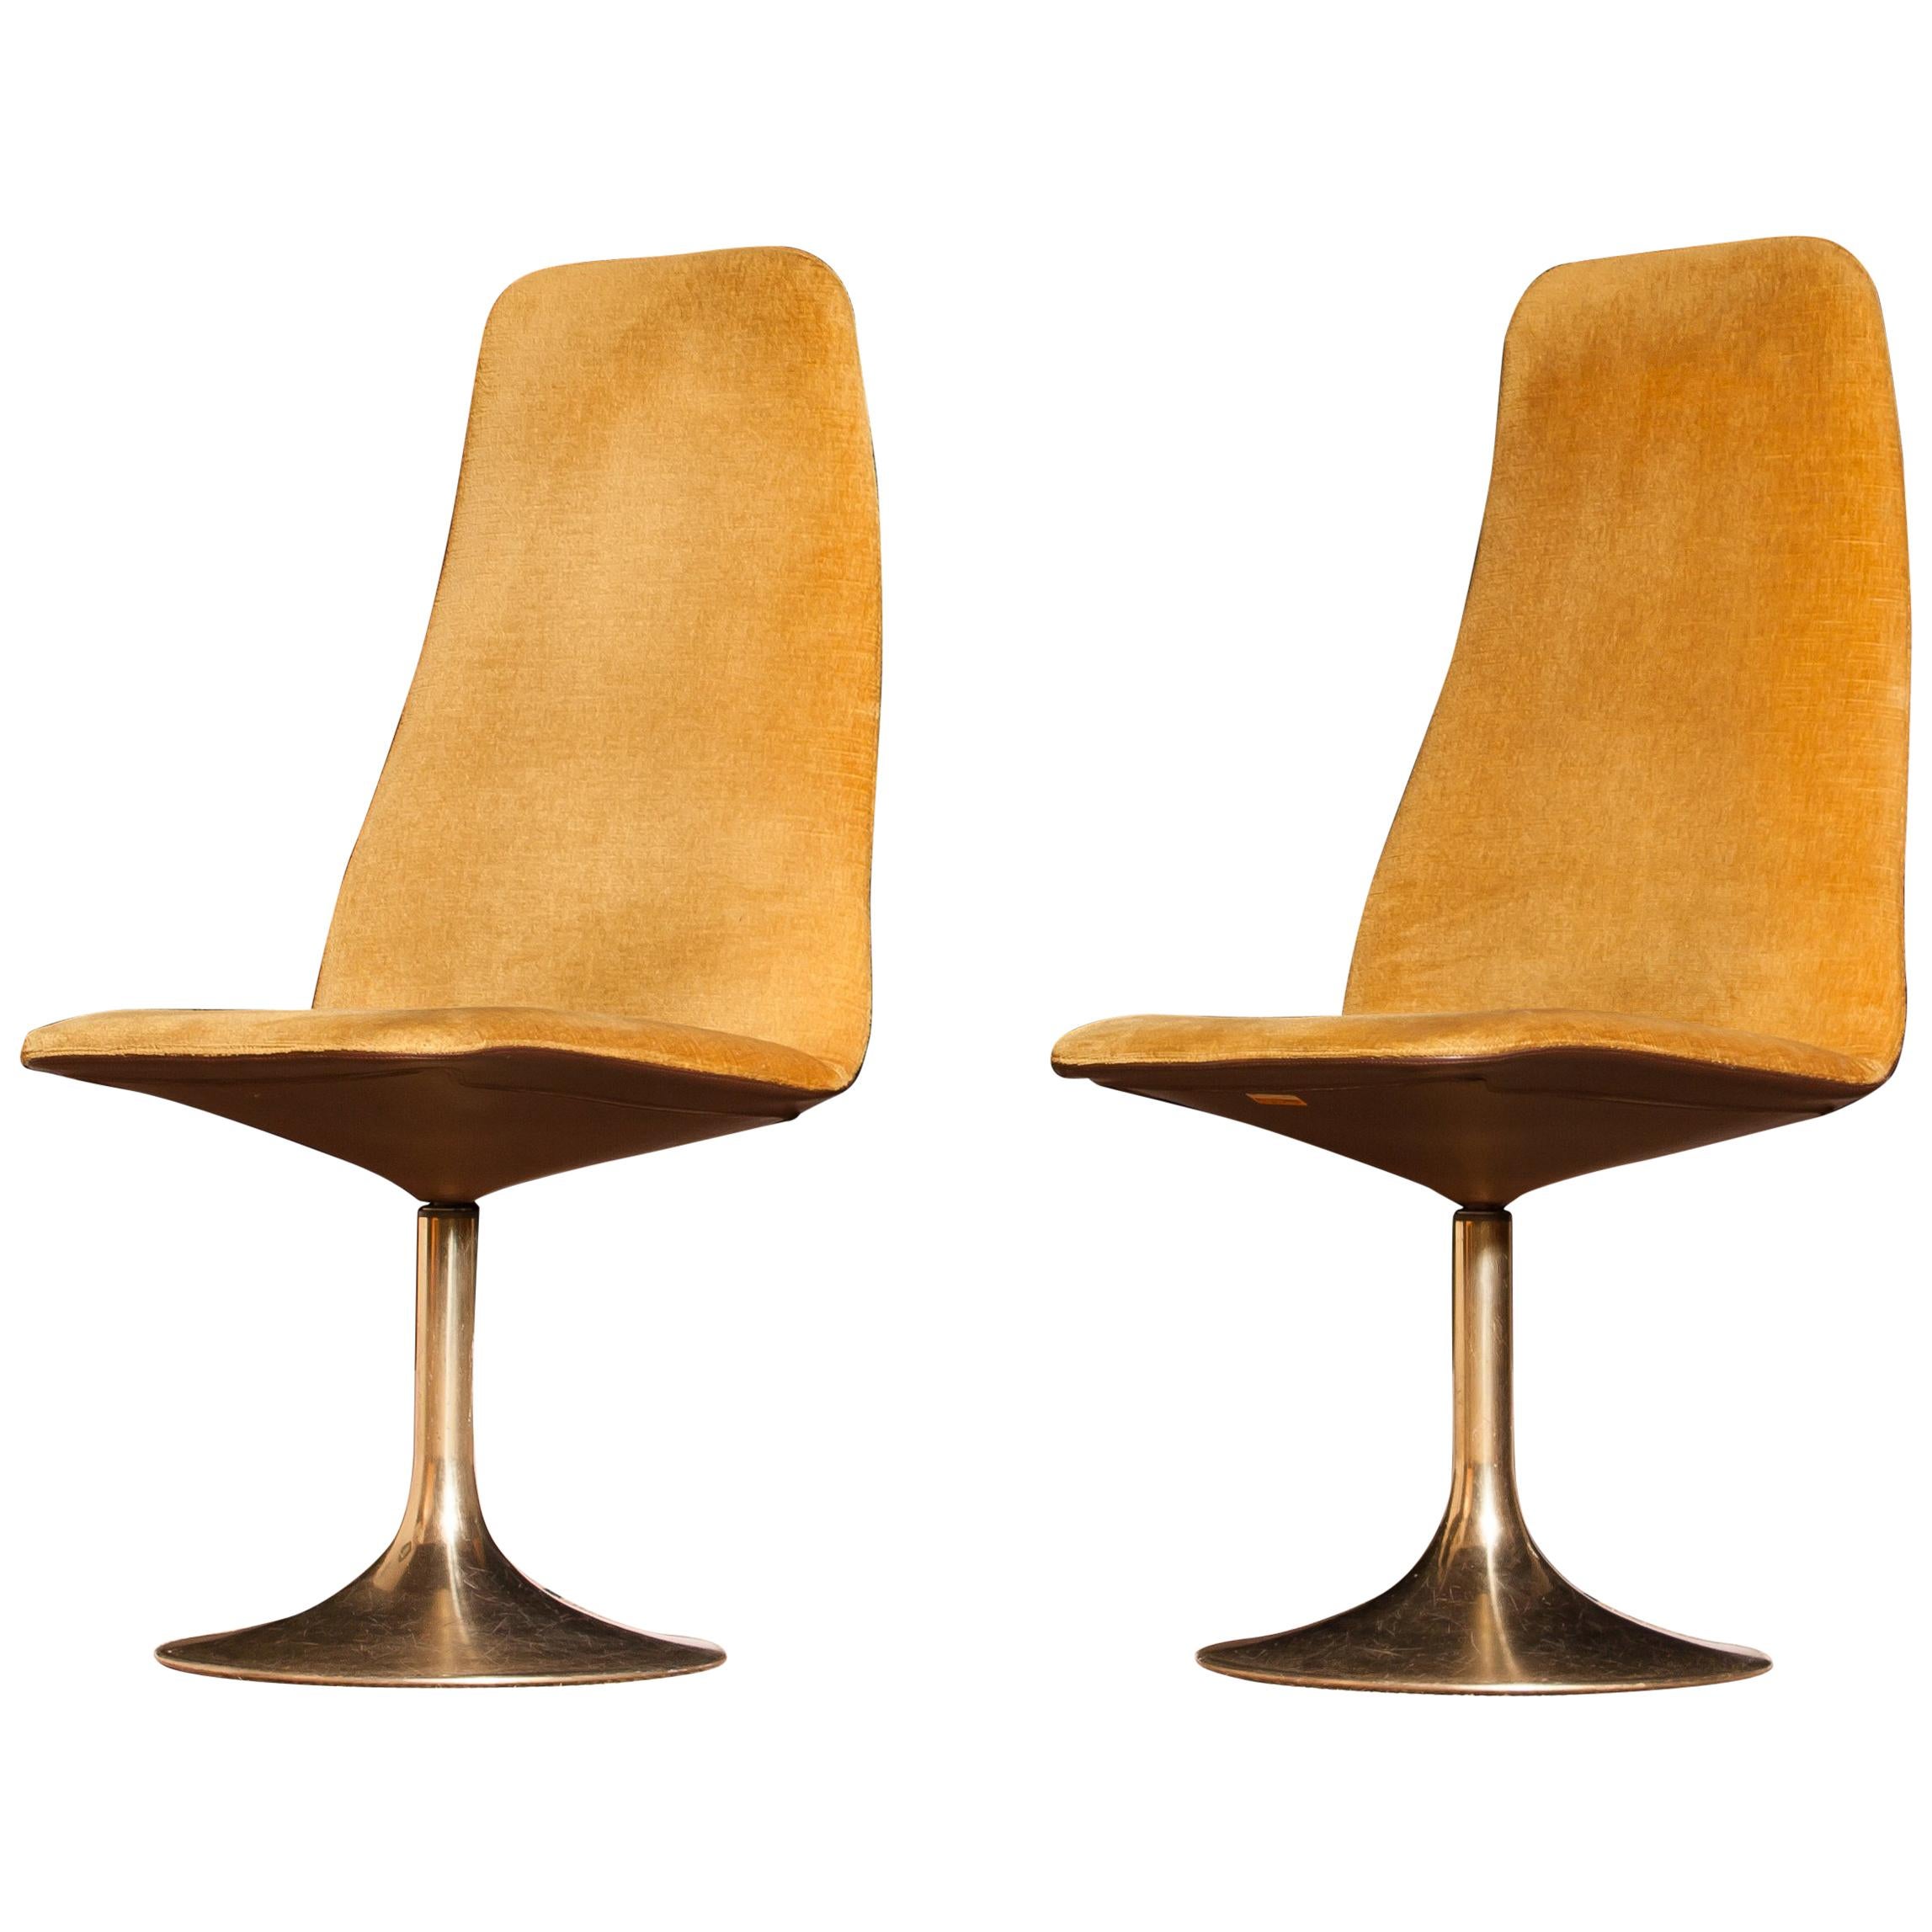 Very nice pair of swivel chairs by Johanson design for Markaryd Sweden.
The chairs have a brass tulip swivel feet with golden velour and faux leather upholstery.
They are labelled.
Period 1970s.
Dimensions: H 102 cm, W 50 cm, D 48 cm, SH 44 cm.